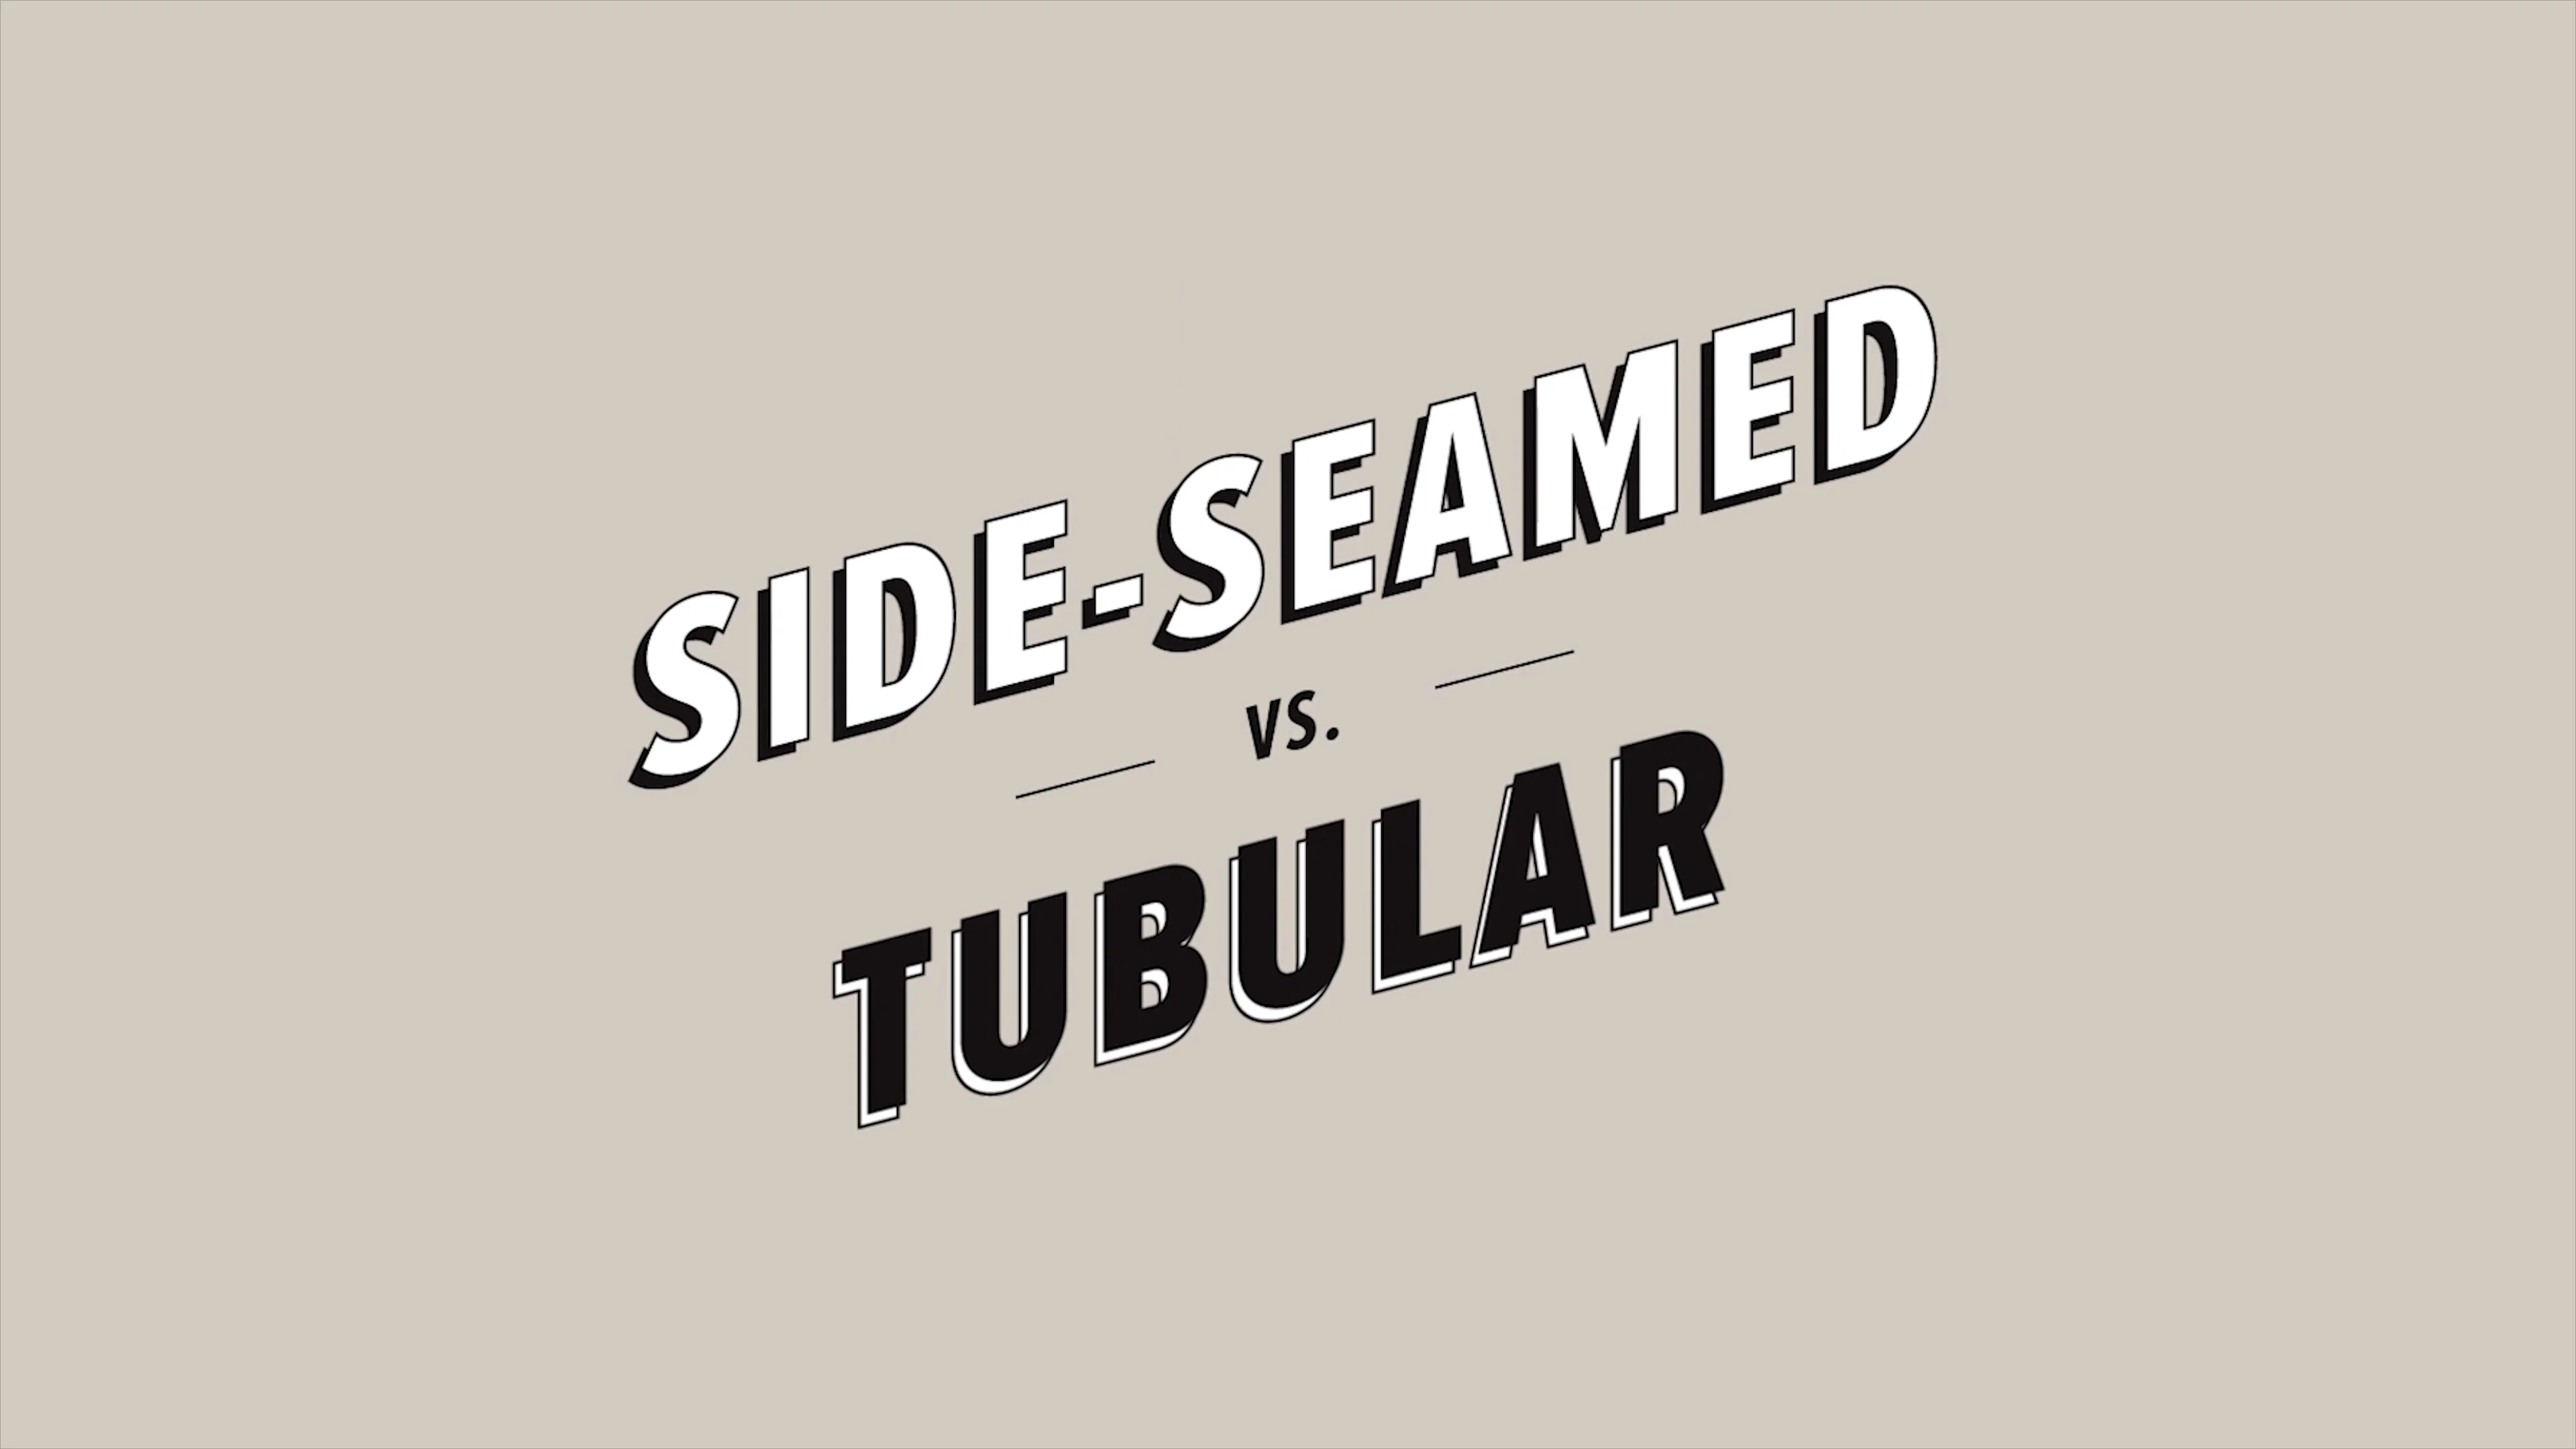 T-Shirt Education: Side-Seams vs. Tubular Construction  Think of your  favorite t-shirt - is it constructed with side seams? Side-seams are an  important part of giving shirts a more contoured & comfy